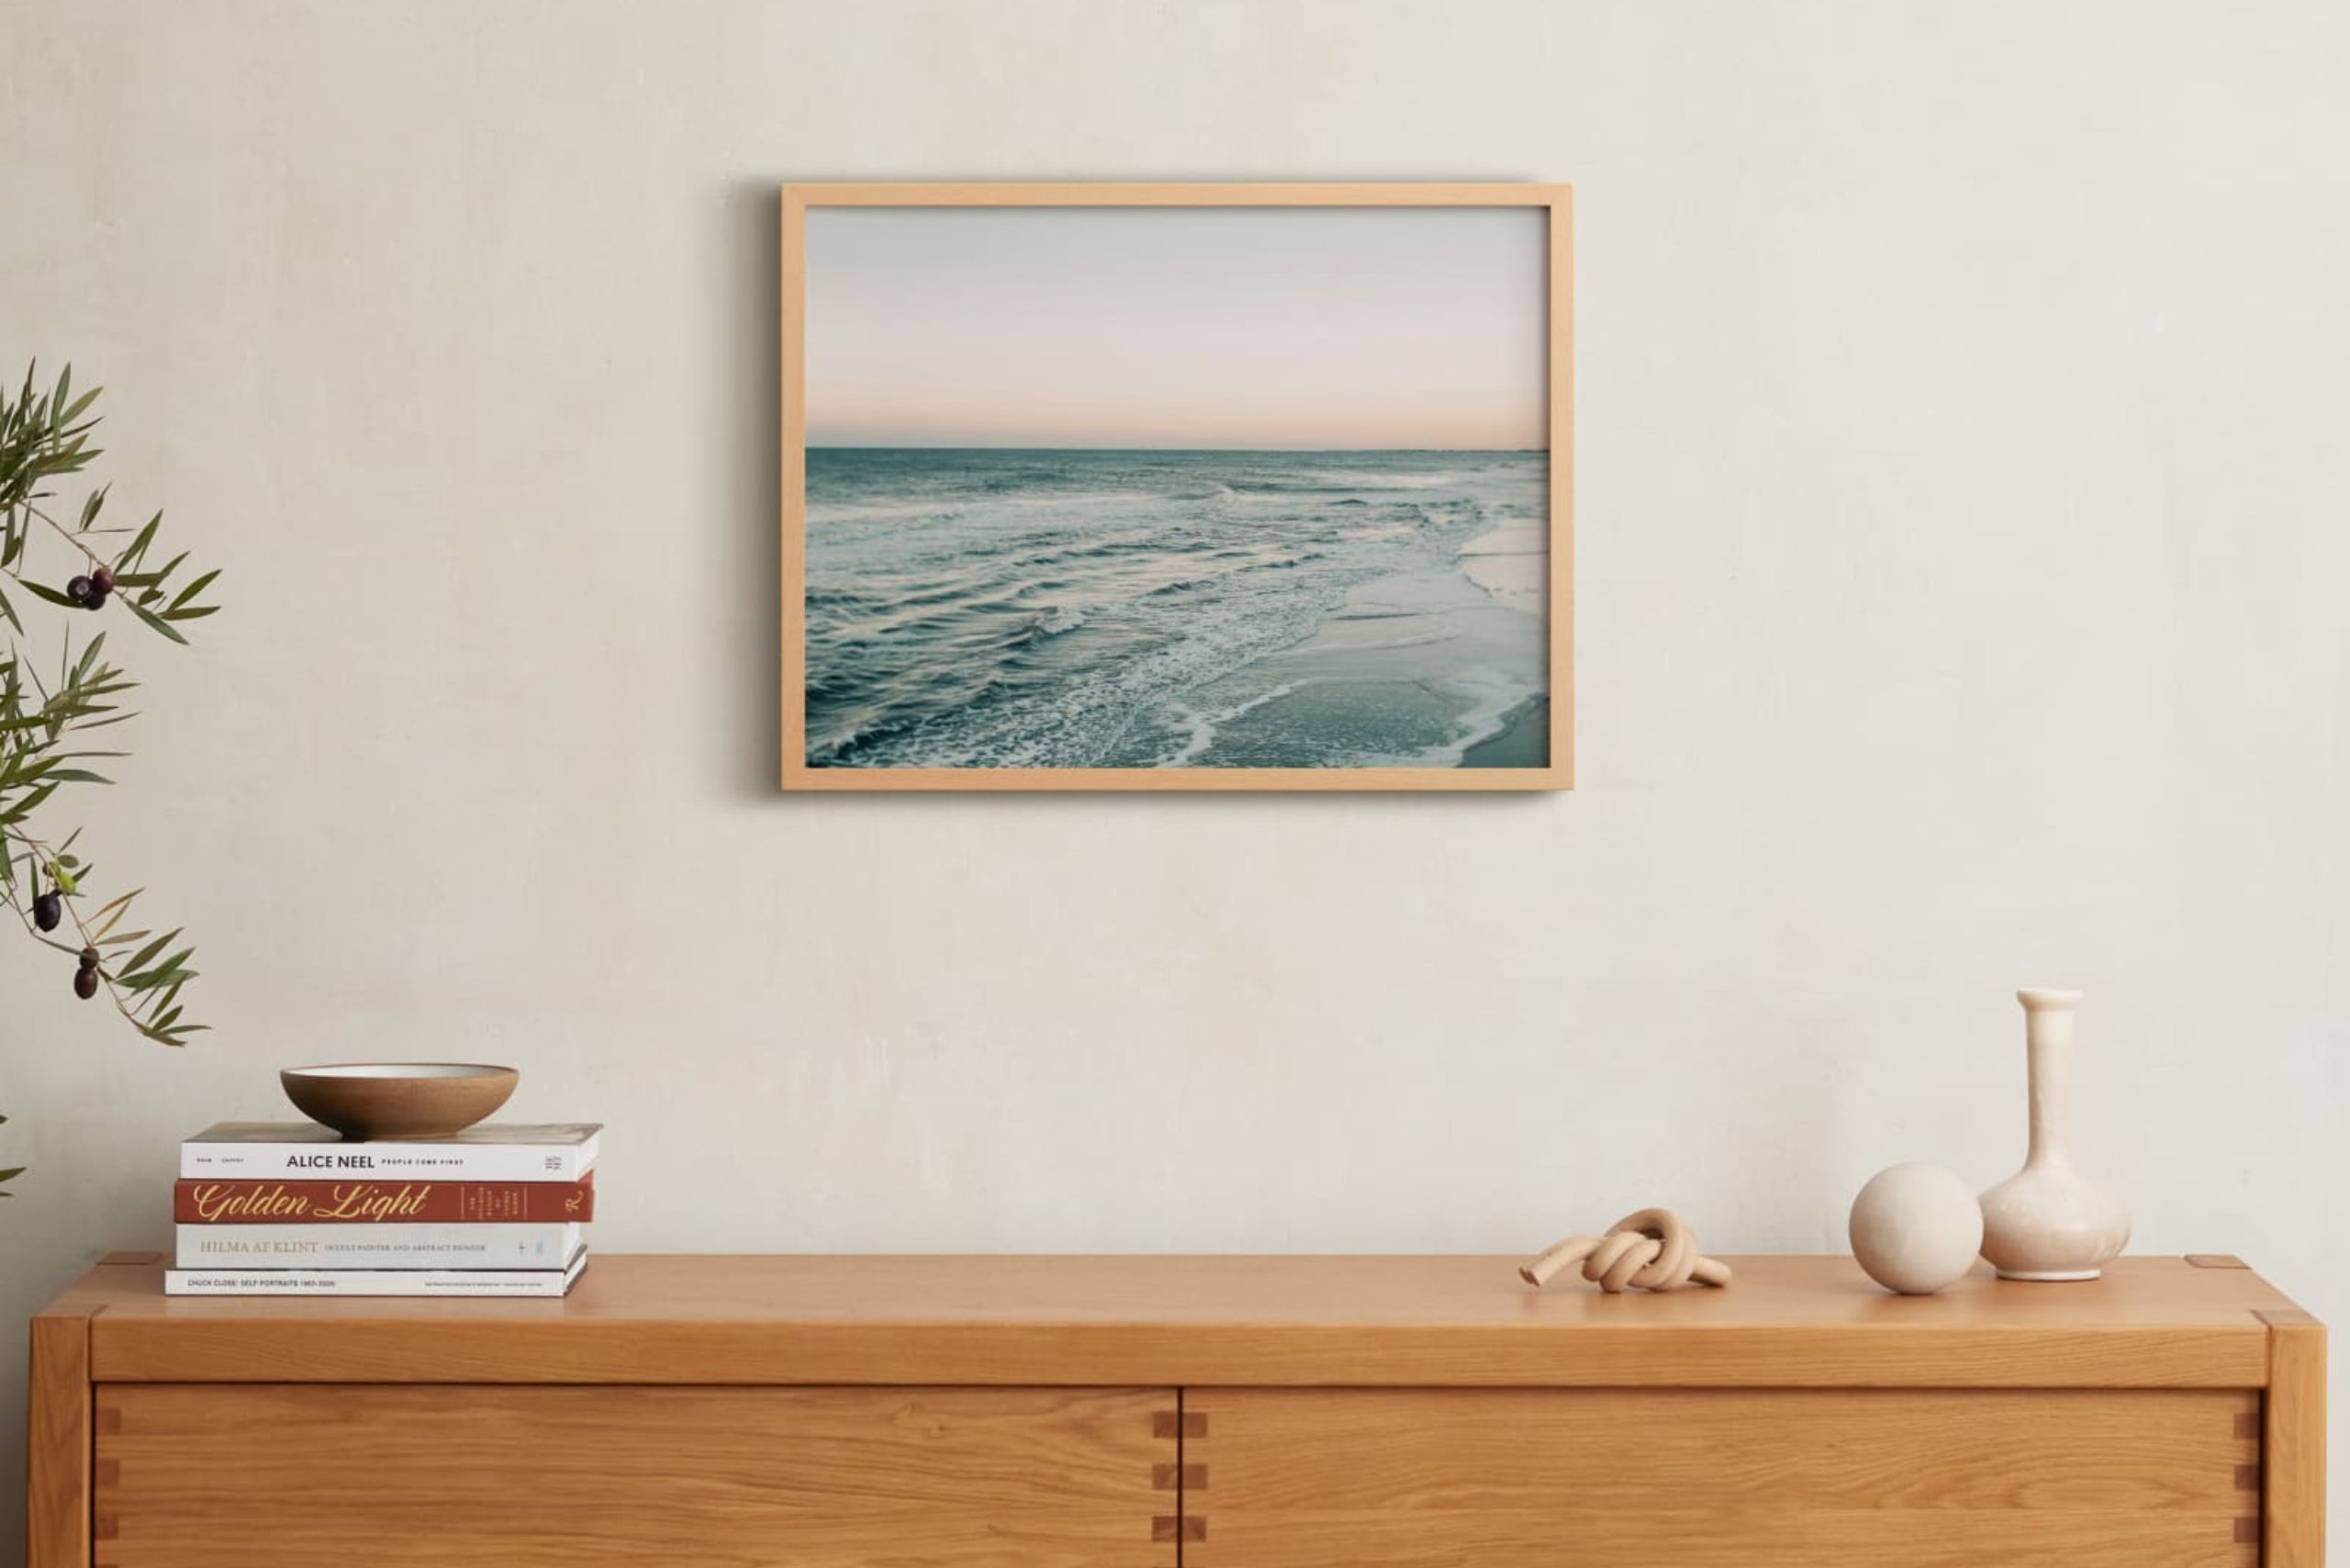 15 Wall Art Prints for Under $100 That Look Way More Expensive